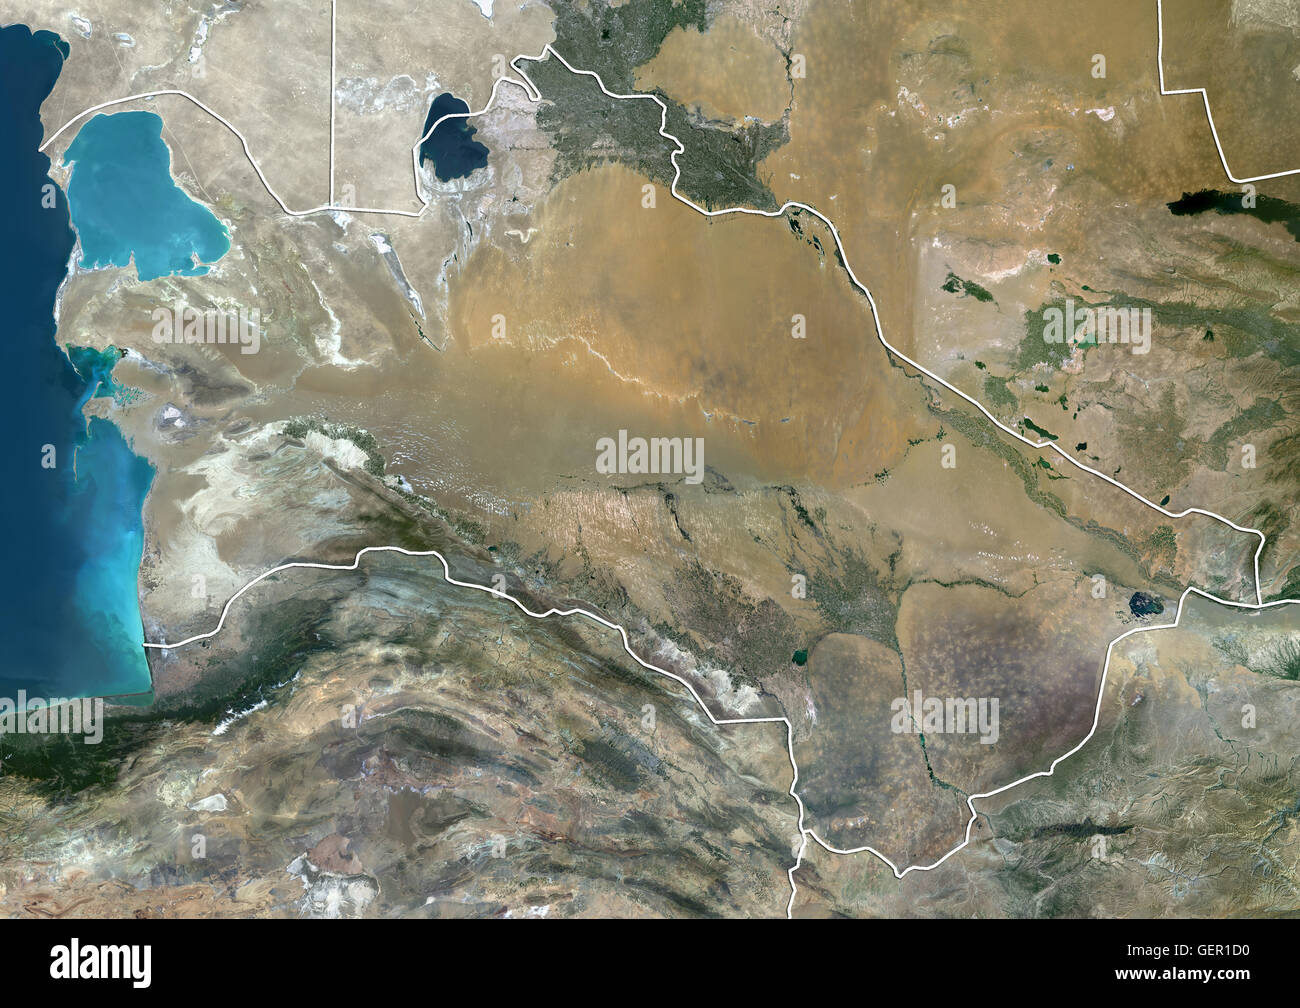 Satellite view of Turkmenistan (with country boundaries). This image was compiled from data acquired by Landsat 8 satellite in 2014. Stock Photo